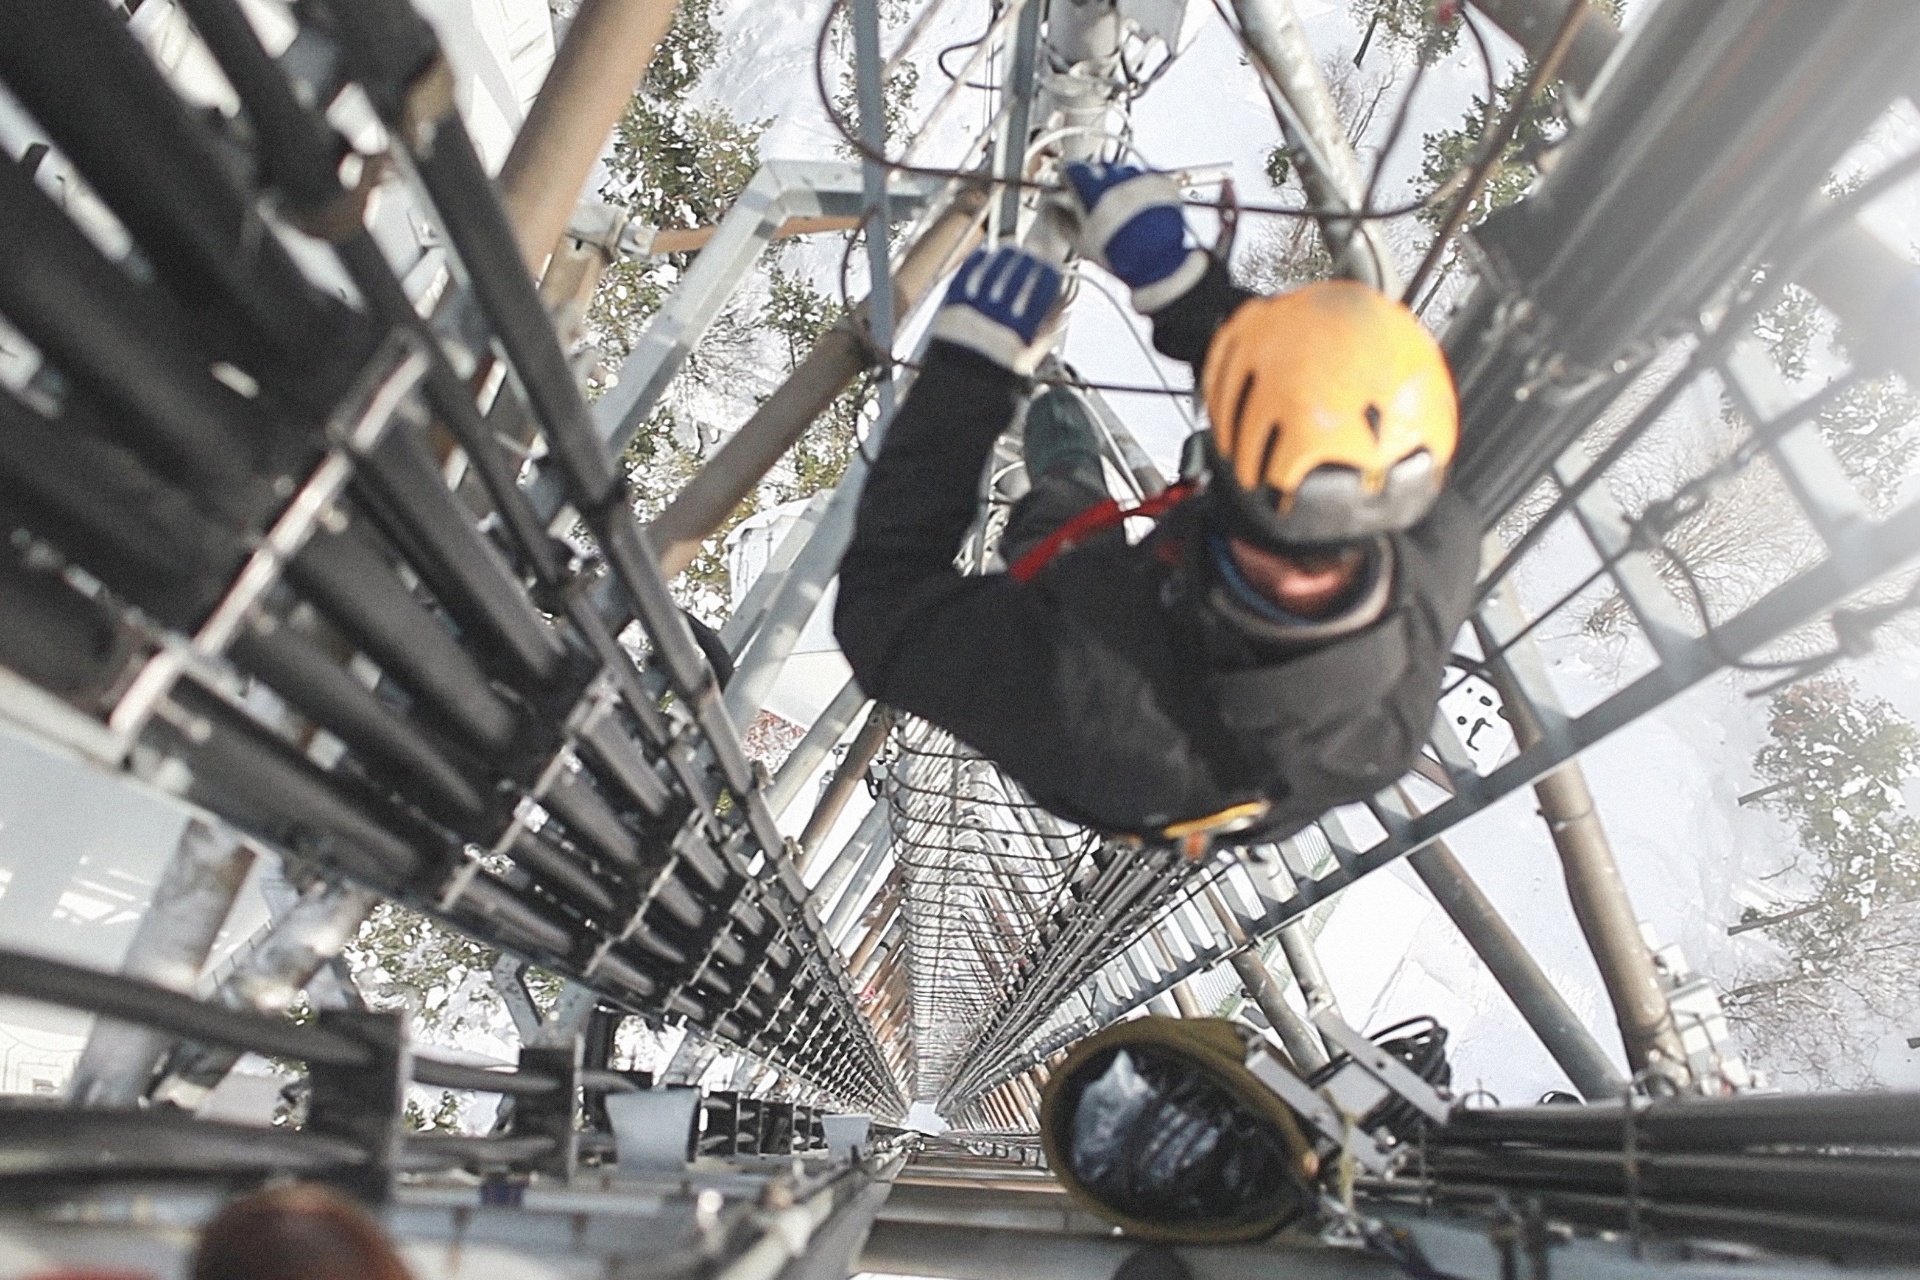 An image of a construction worker climbing the phone tower